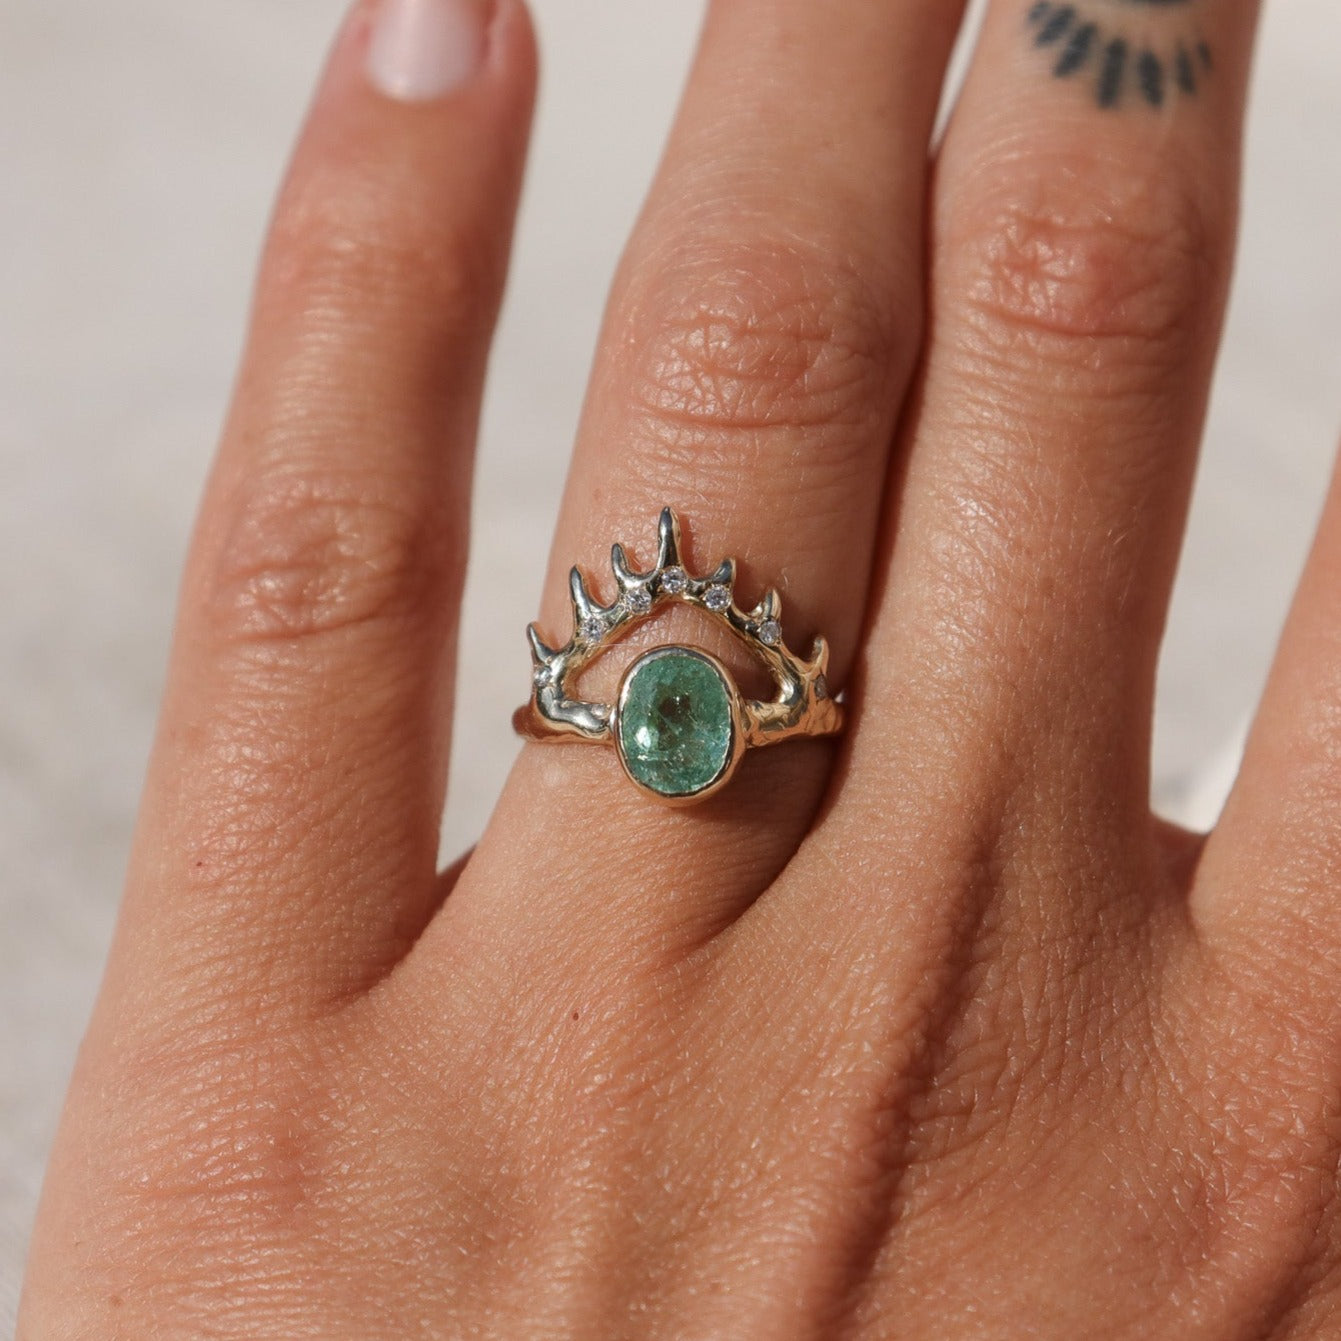 Elegant oval Paraiba tourmaline bezel-set in a coral-inspired crown-like V-shaped gold setting, accentuated by sparkling diamond details, worn on a finger to show scale.